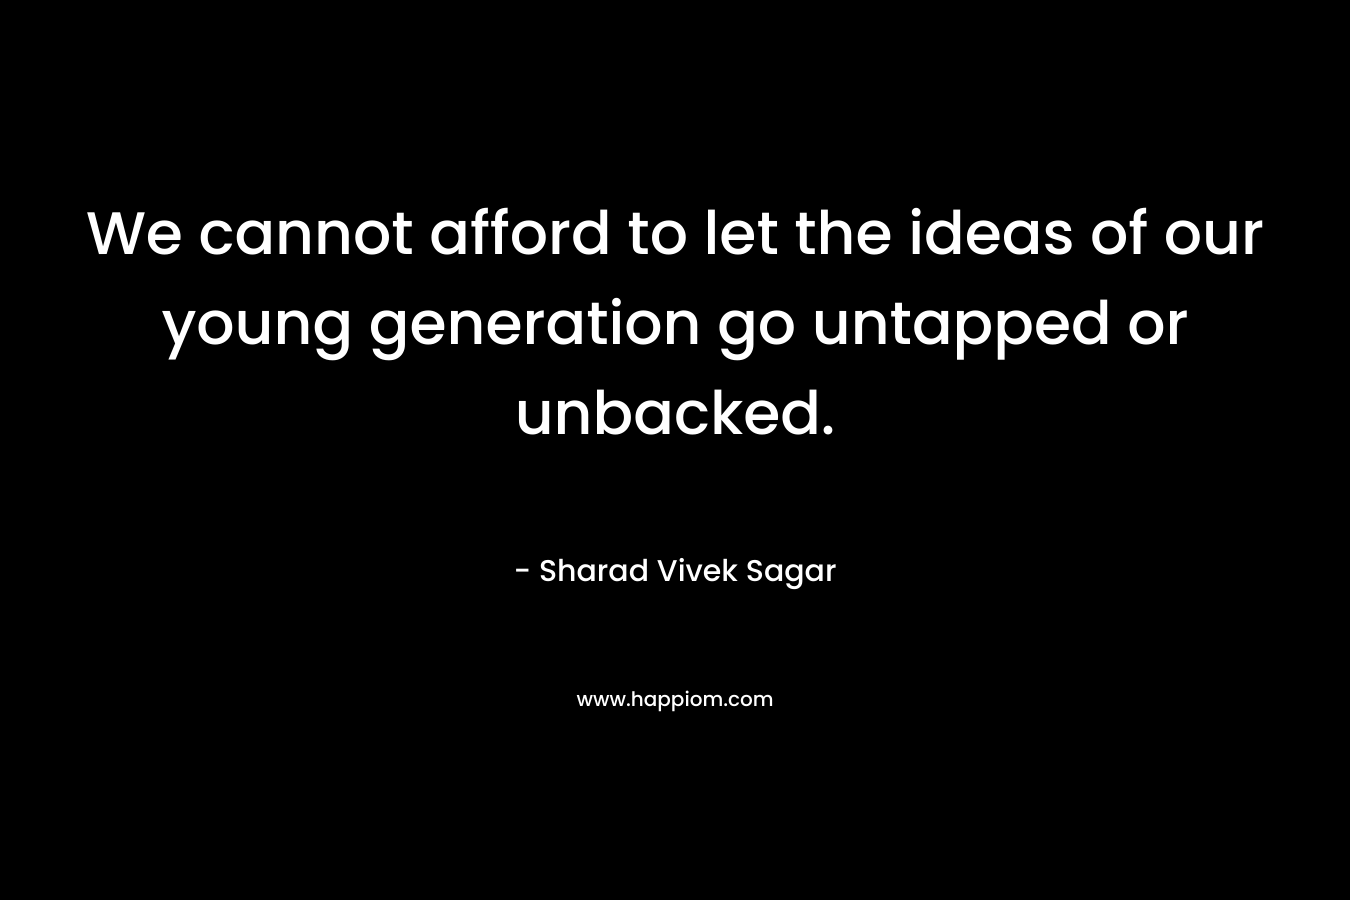 We cannot afford to let the ideas of our young generation go untapped or unbacked.